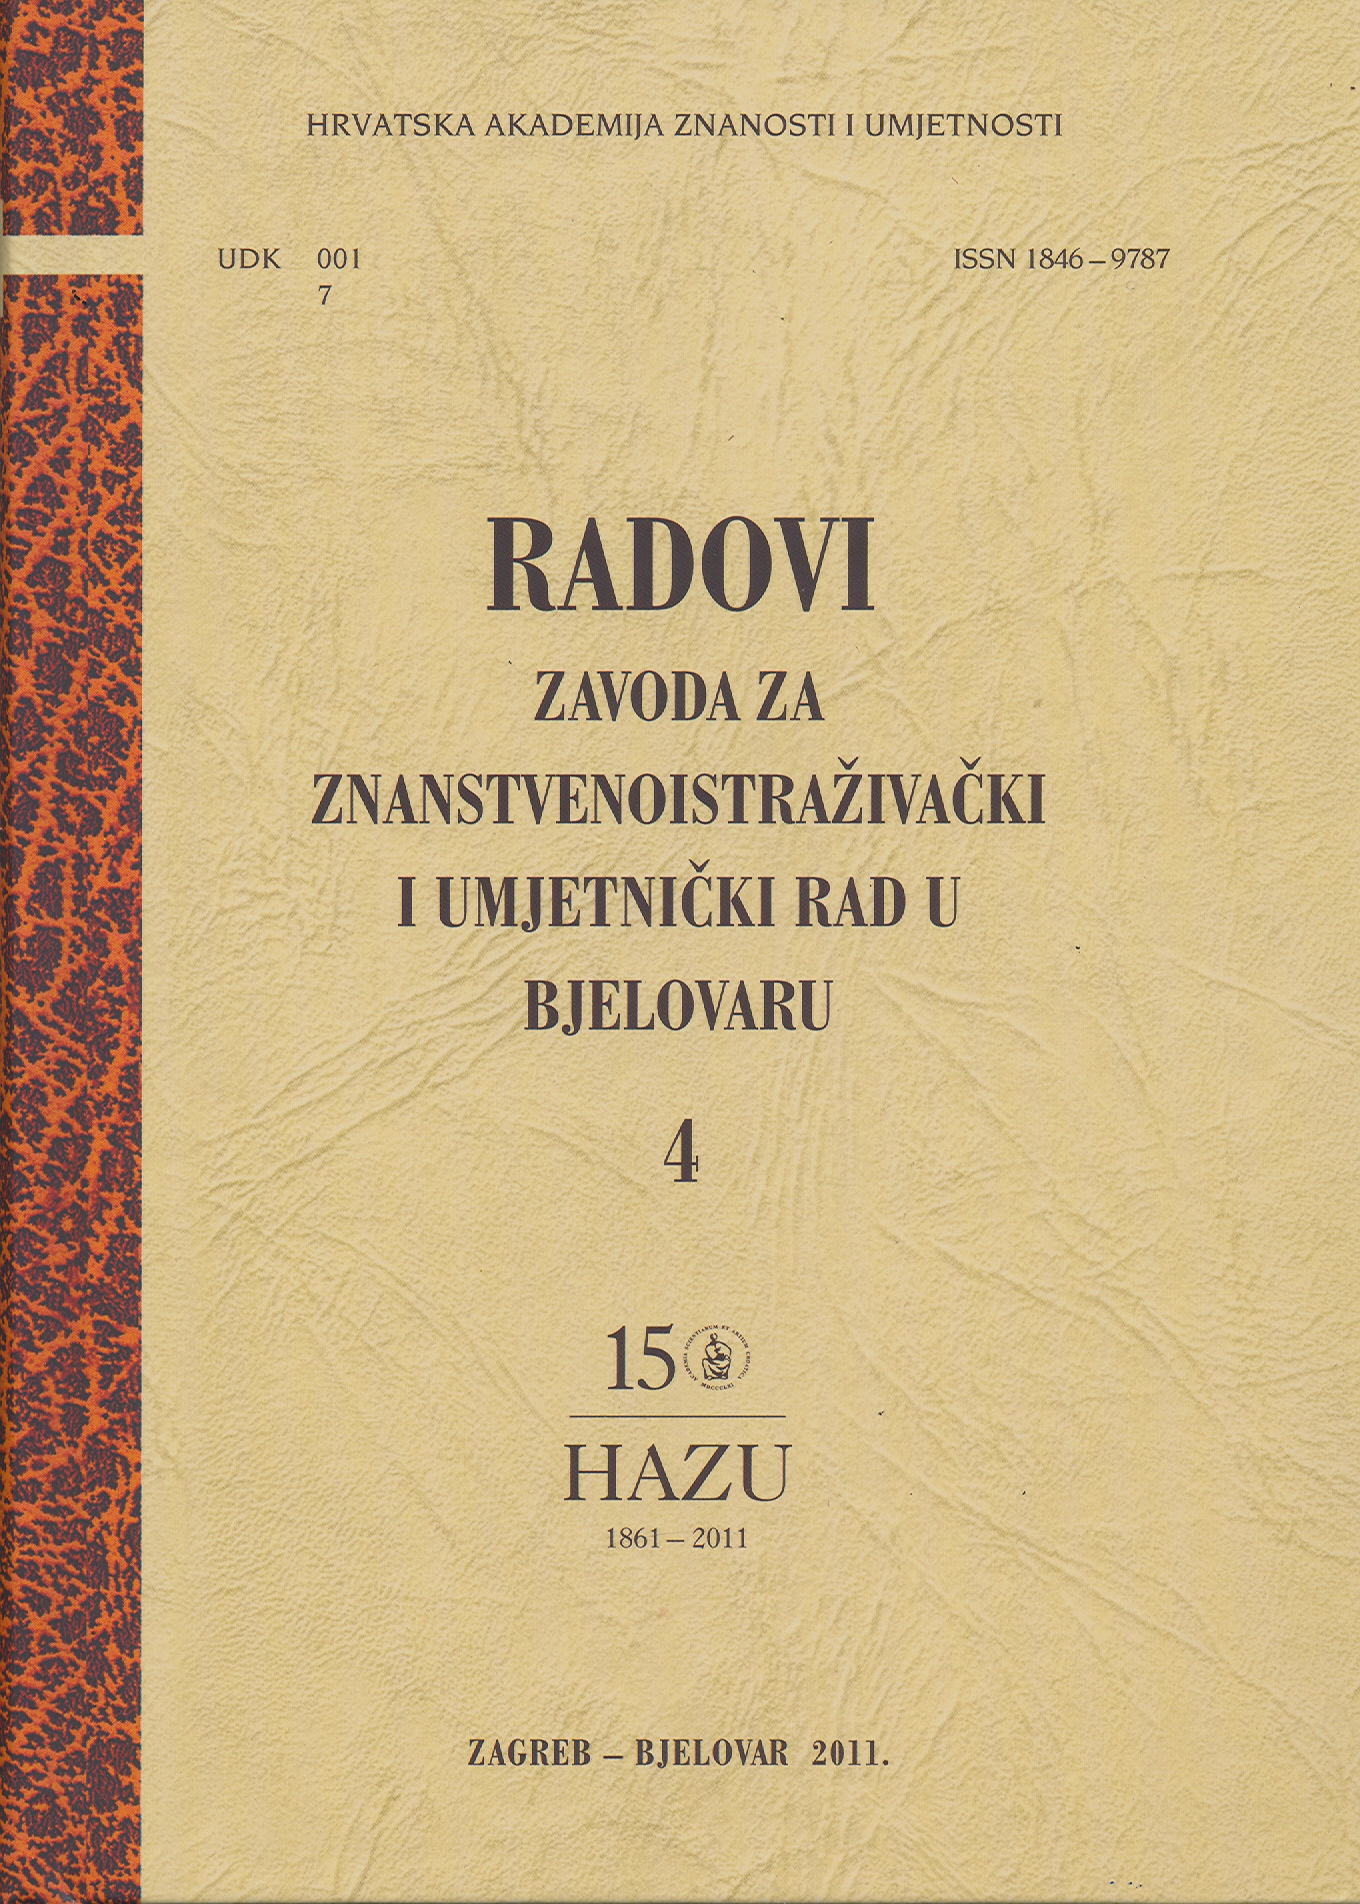 Garić-Grad in the Museum of Moslavina Holdings Cover Image